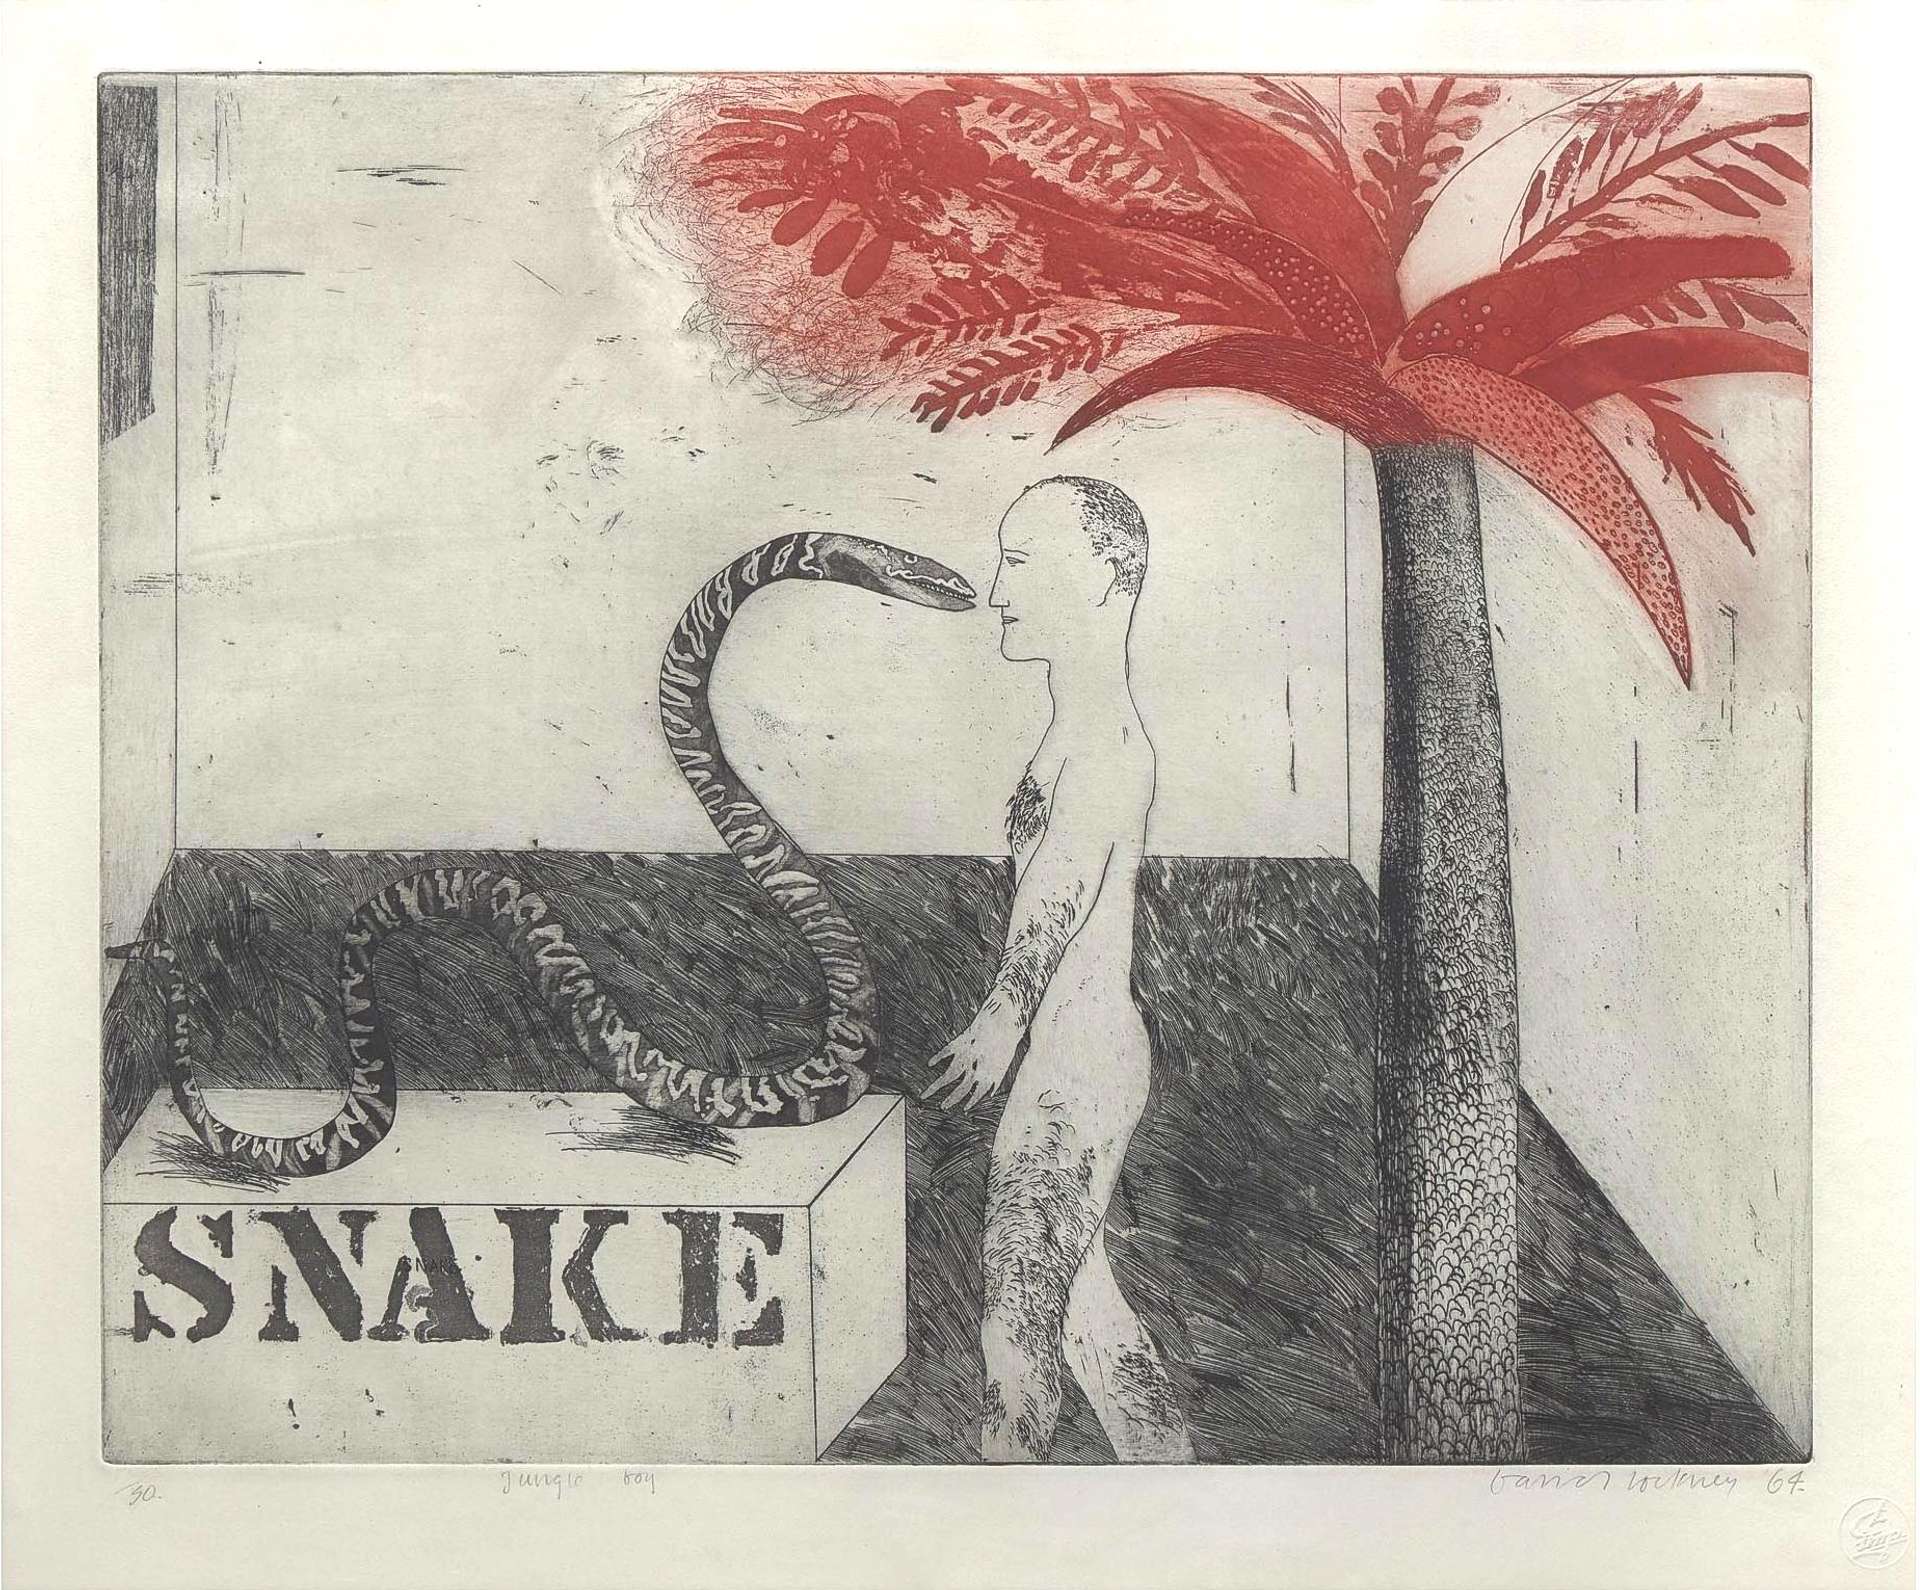 David Hockney’s Jungle Boy. An intaglio print of a nude man standing in front of a snake with a red tree behind him.